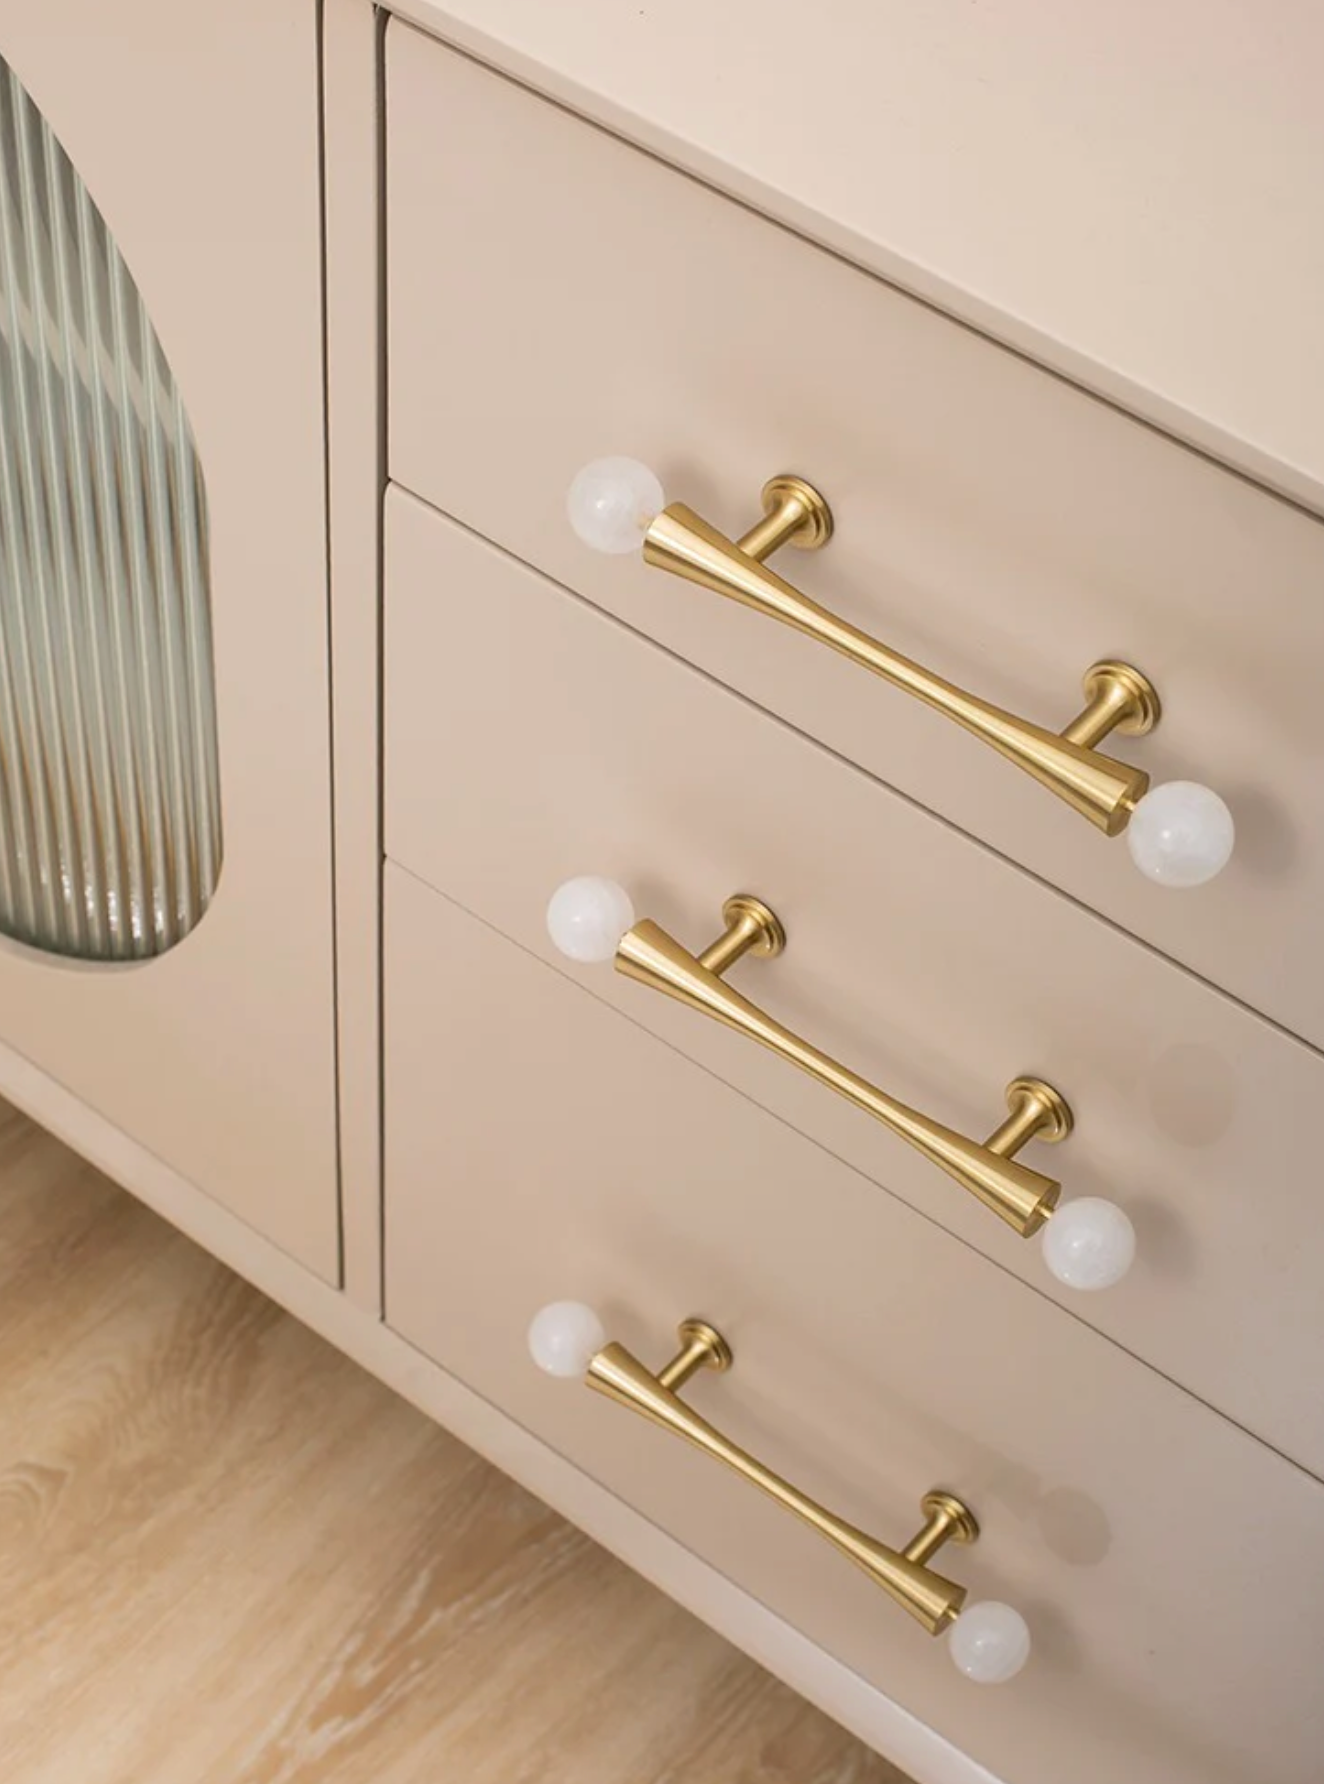 What Cabinet Hardware Is Trending Now?